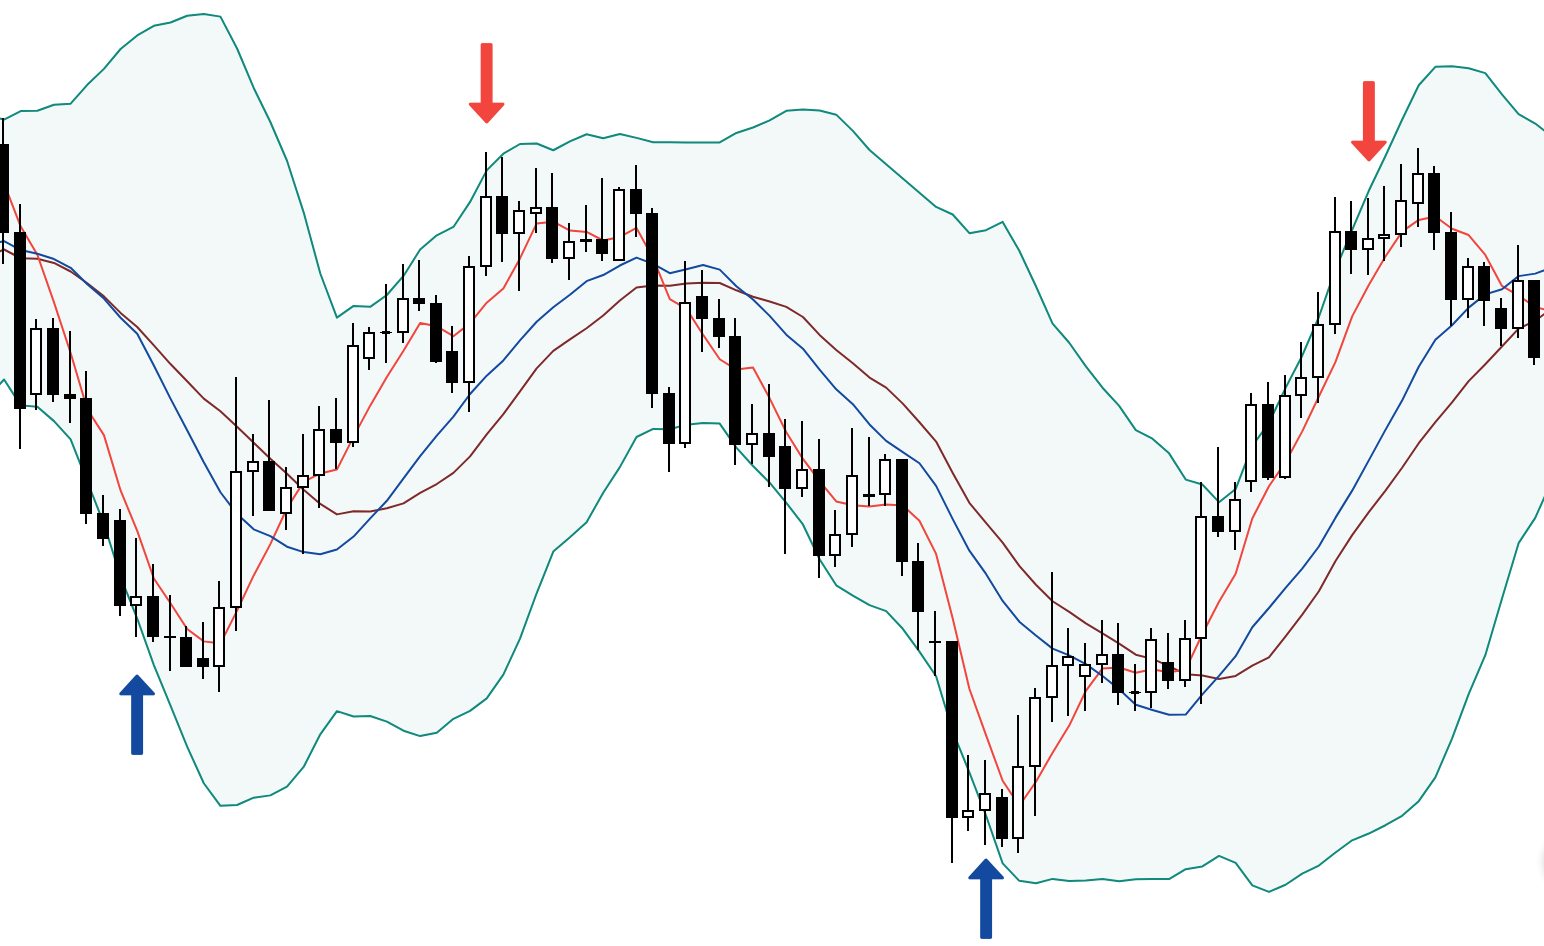 3 moving averages with Bollinger Bands